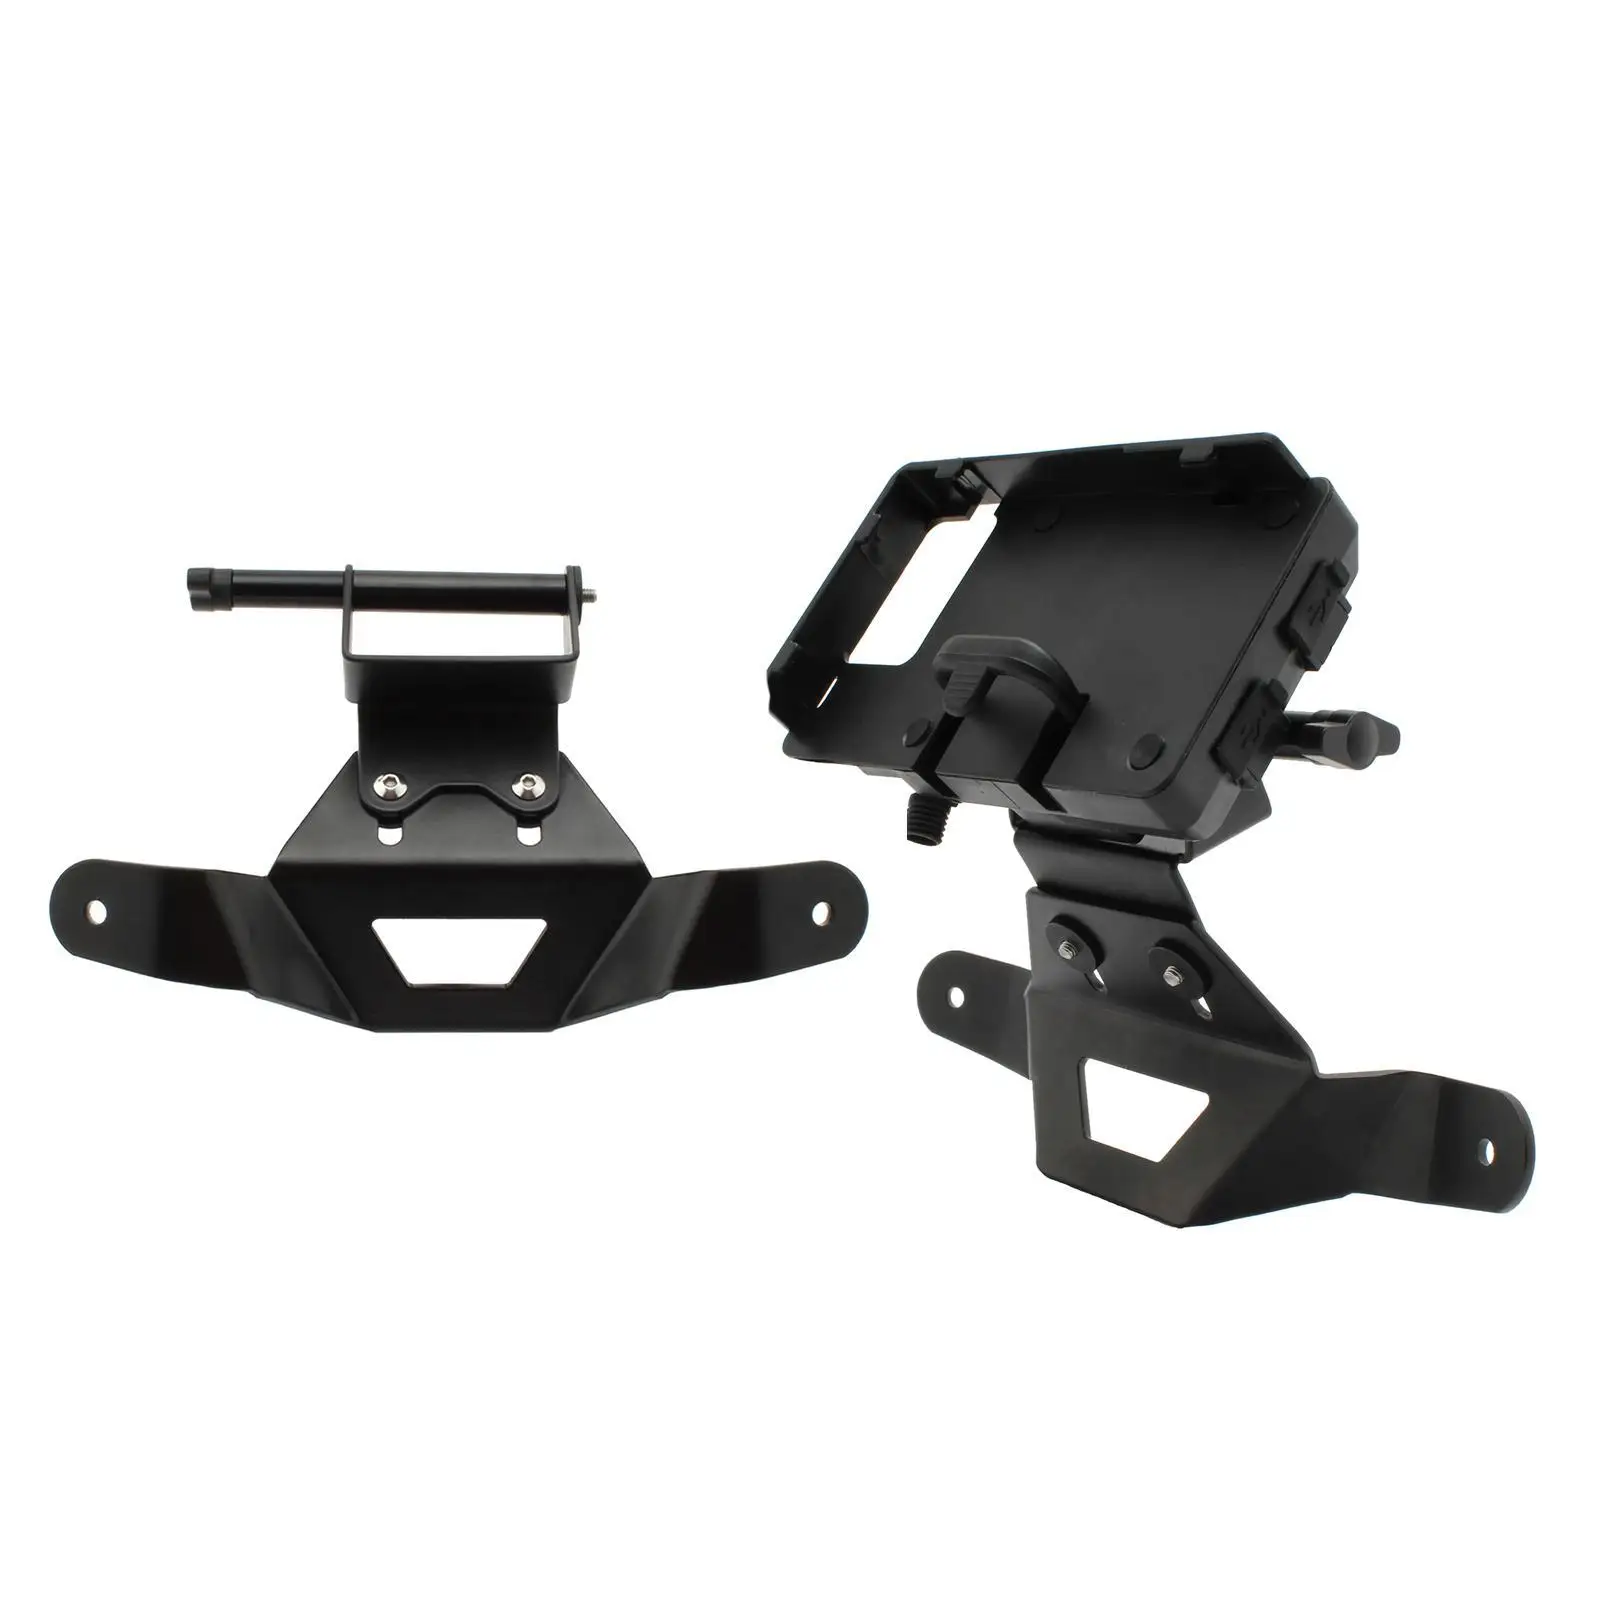 Waterproof Motorcycle Navigation Bracket Charger Phone Holder Fast Charging FOR BMW C 400 GT